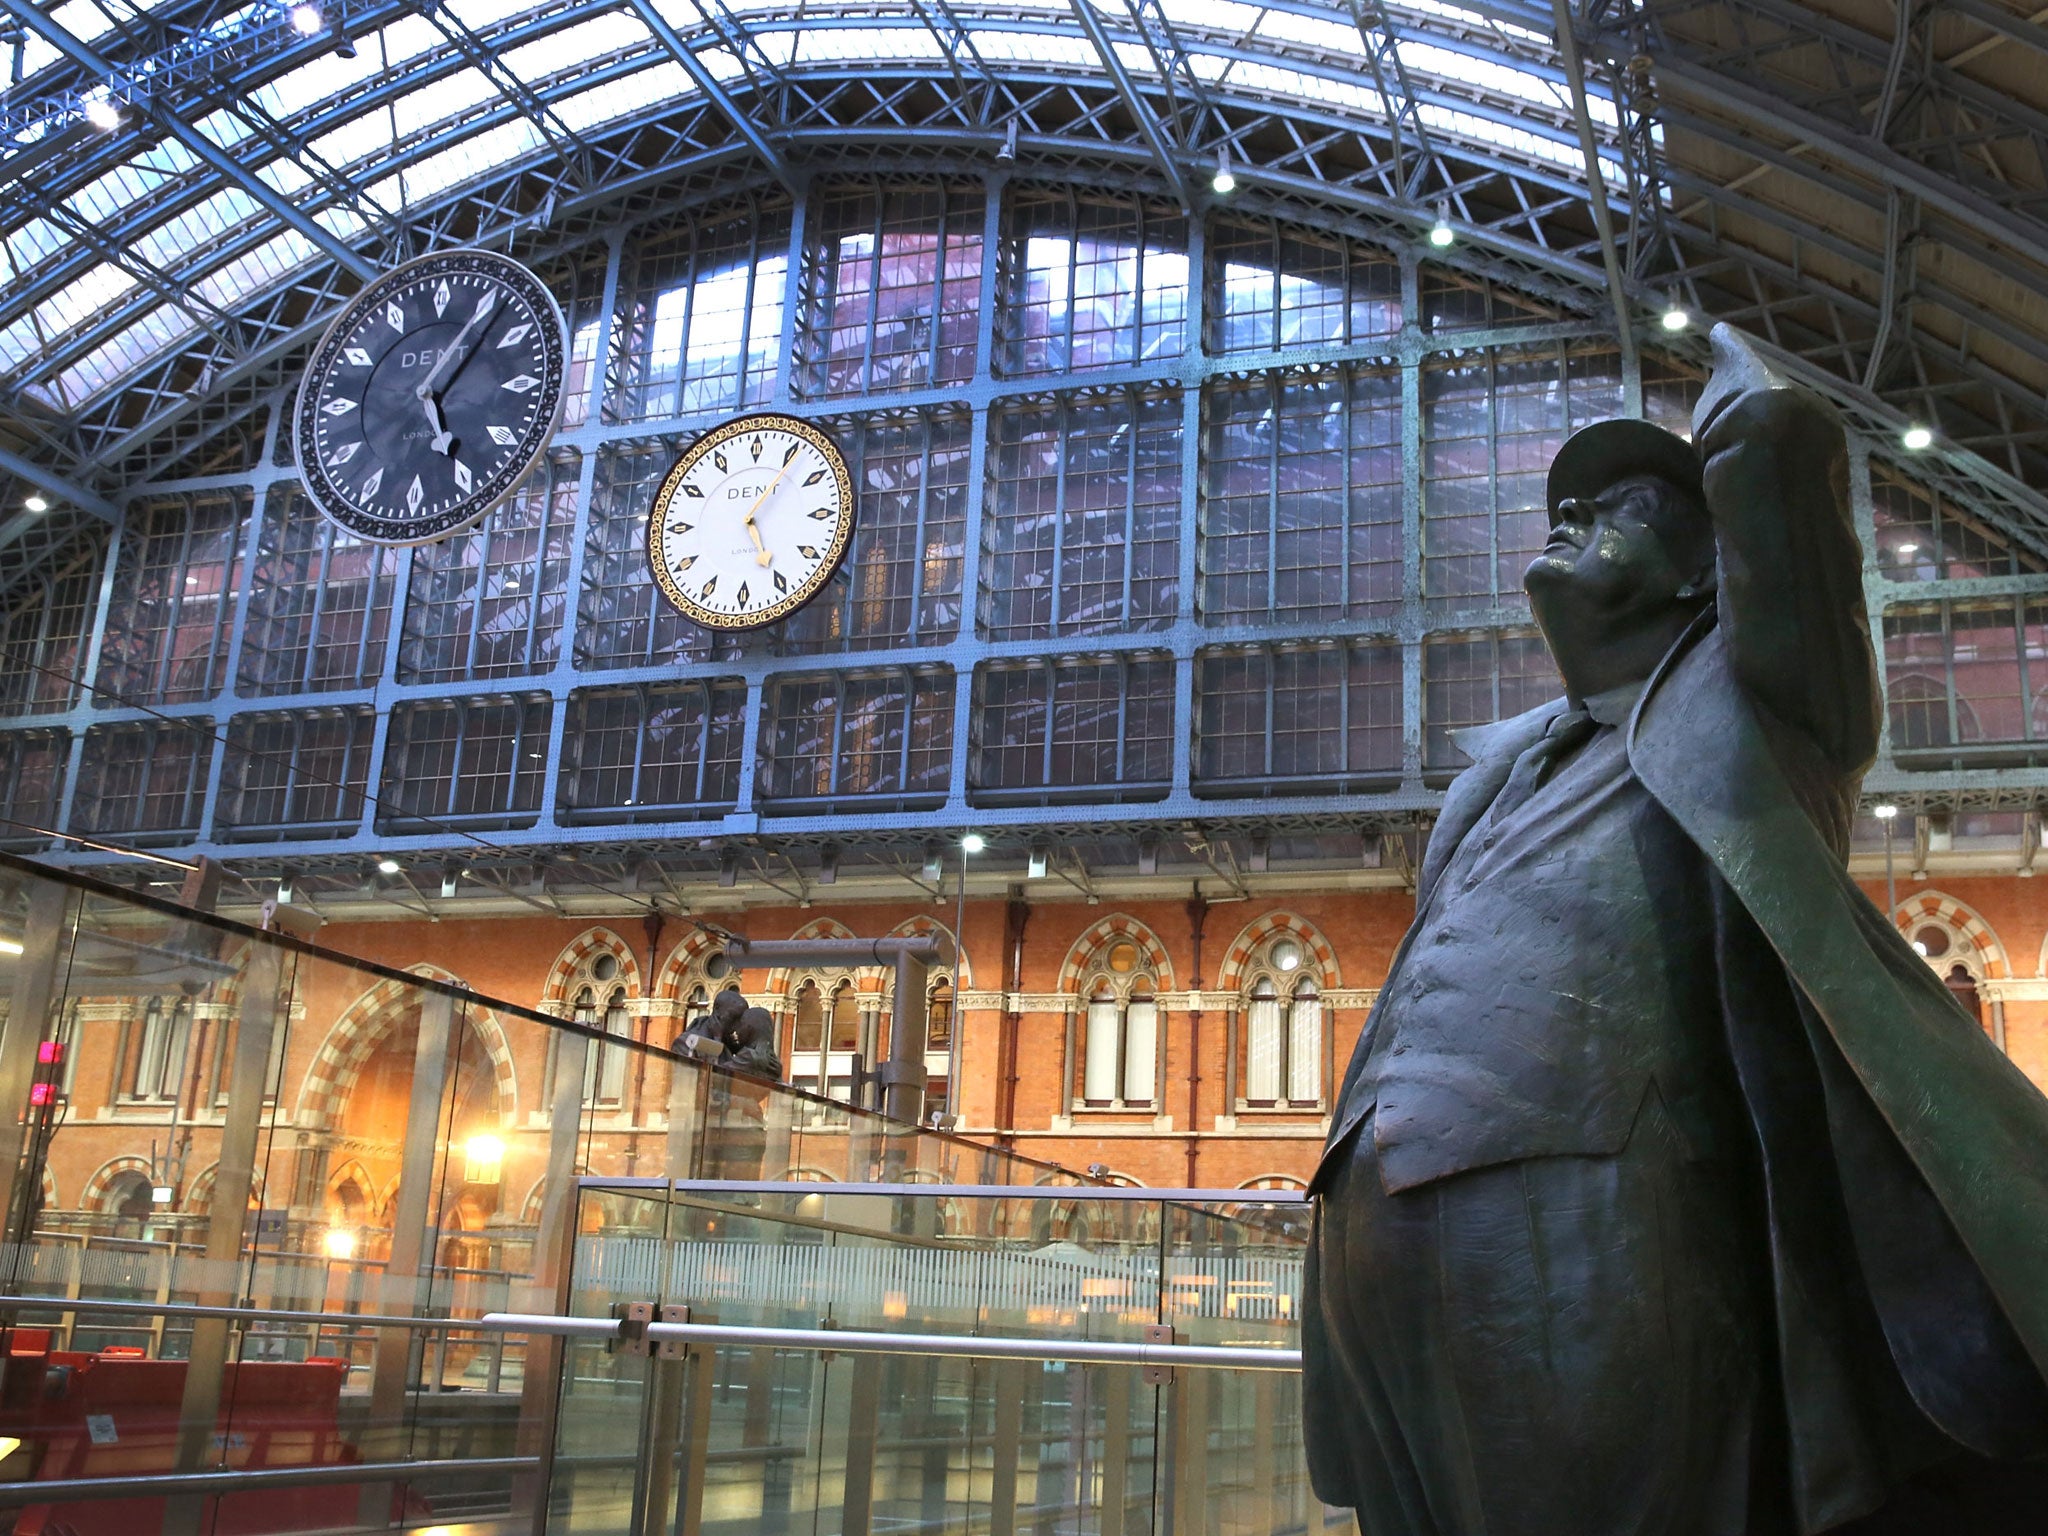 The incident happened at St Pancras International railway station